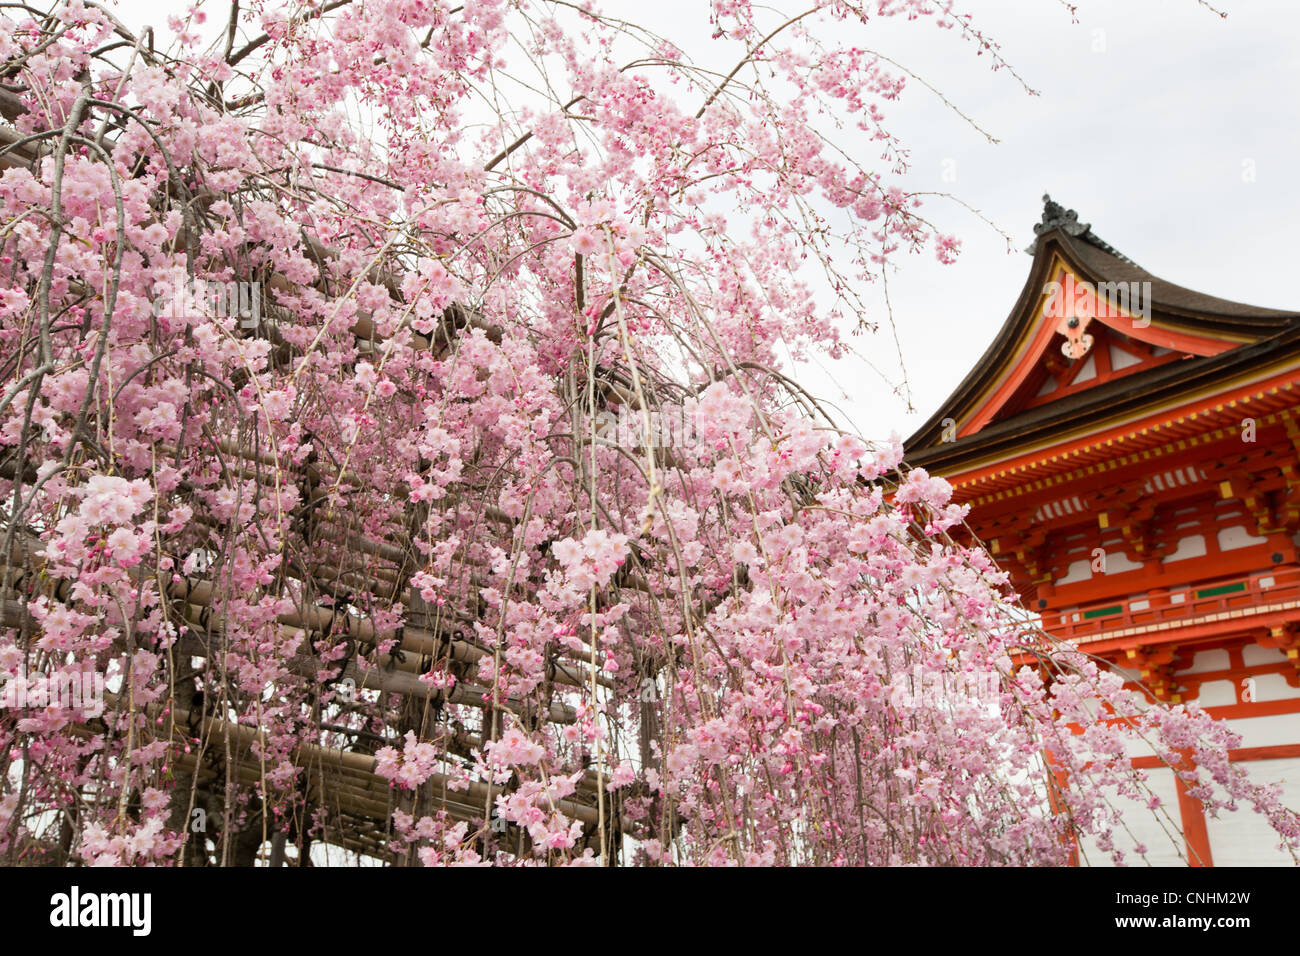 Sakura flowers or Cherry blossoms in full bloom on a pink